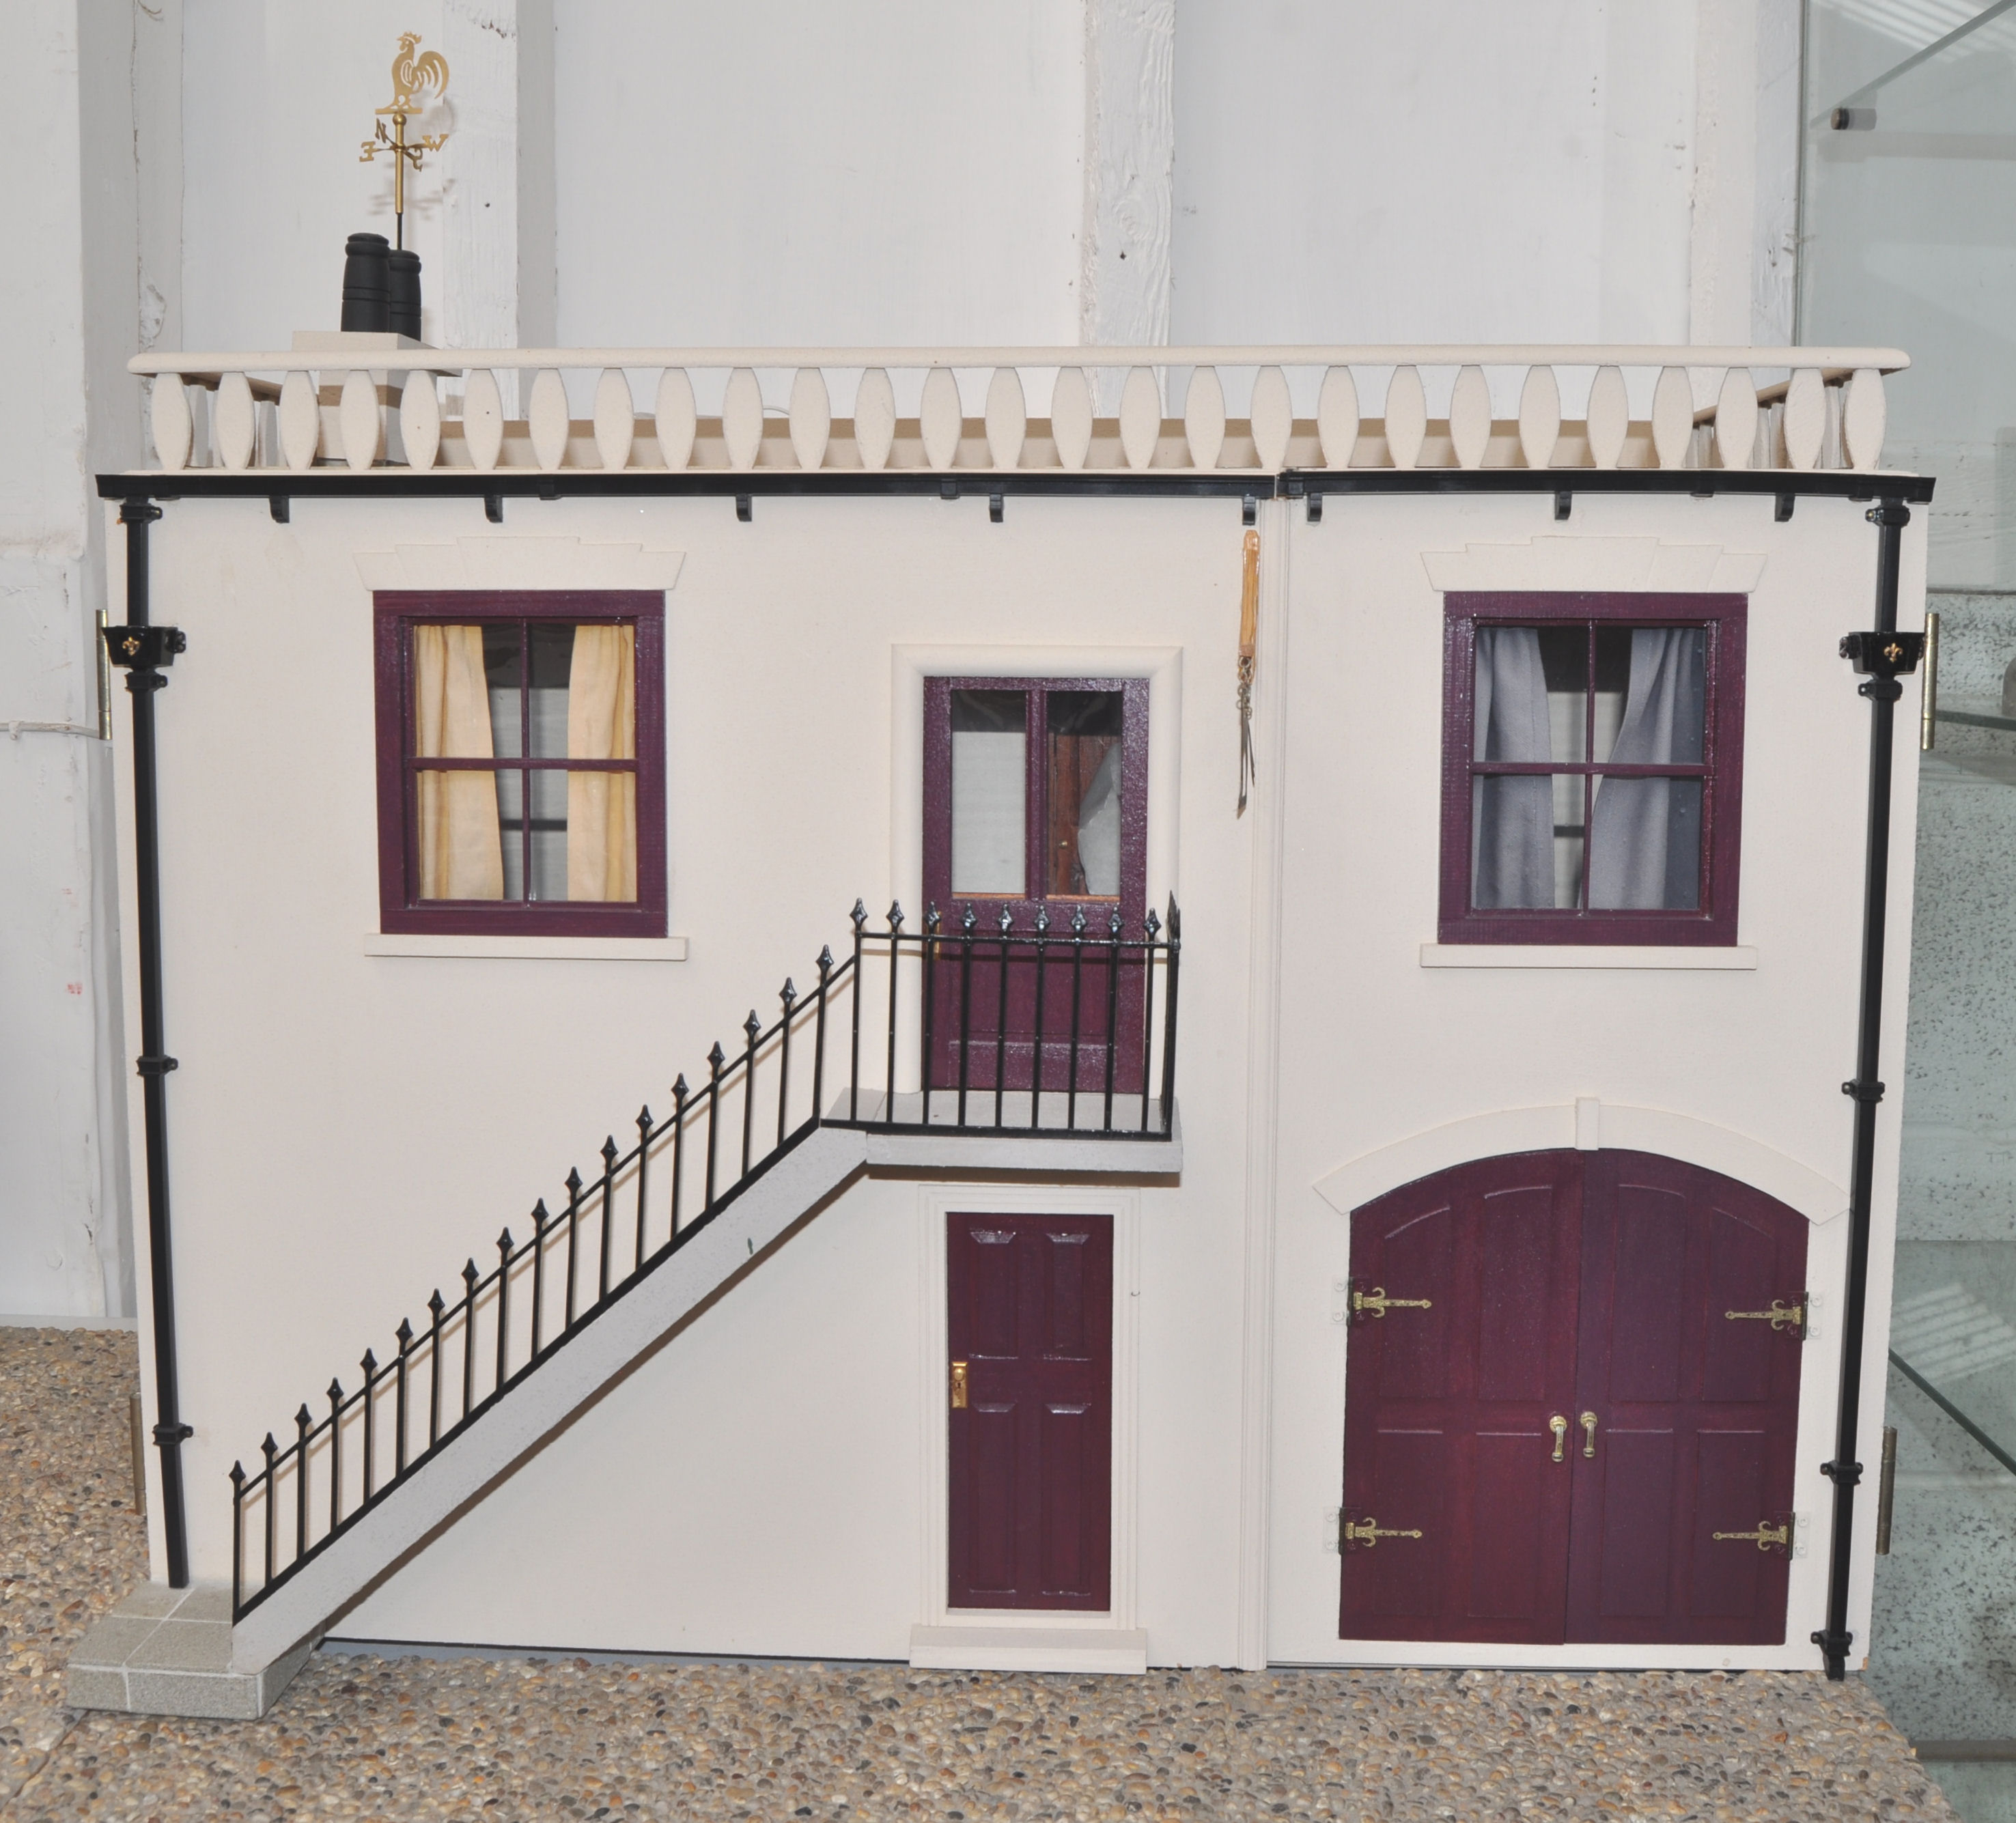 PRIVATE COLLECTION OF DOLL'S HOUSES - VICTORIAN MANOR & STABLE - Image 2 of 26